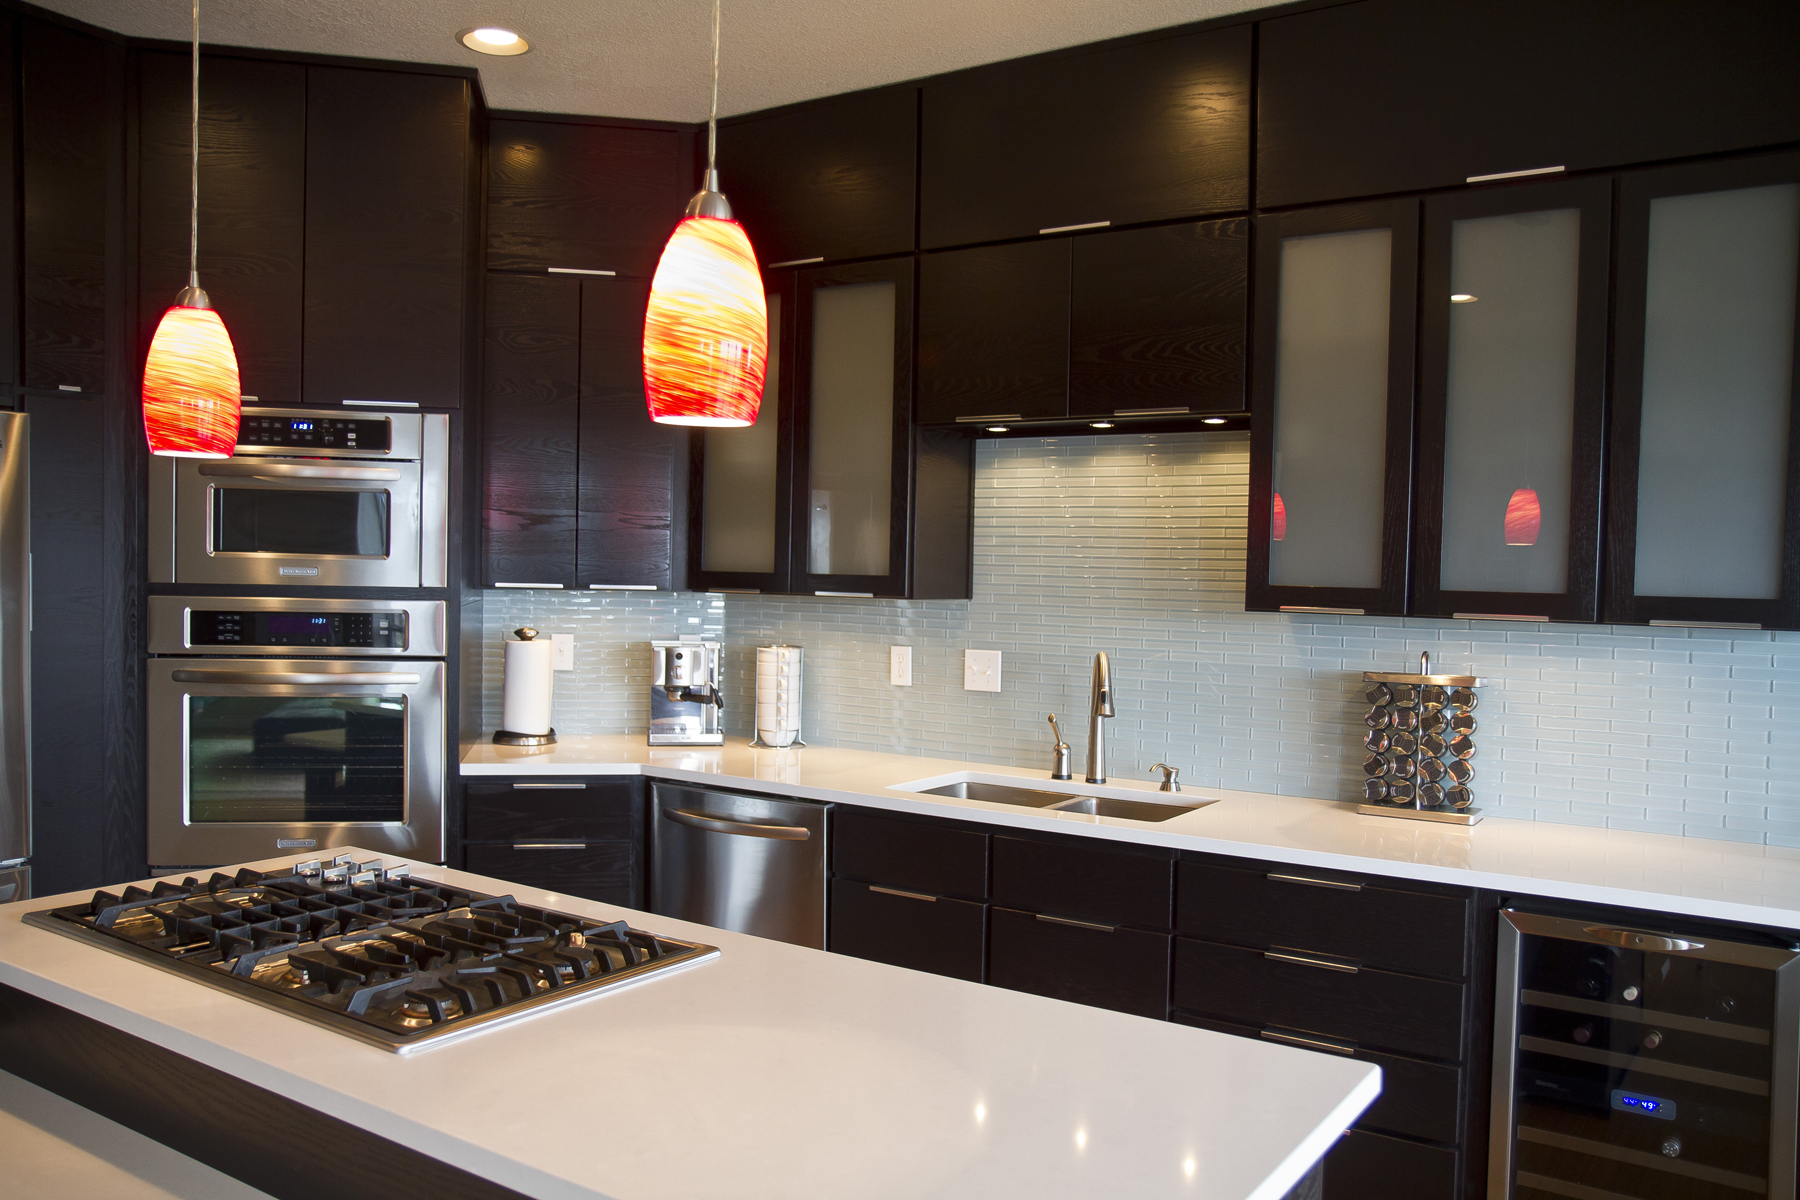 kitchens designs previousnext HPIOKED